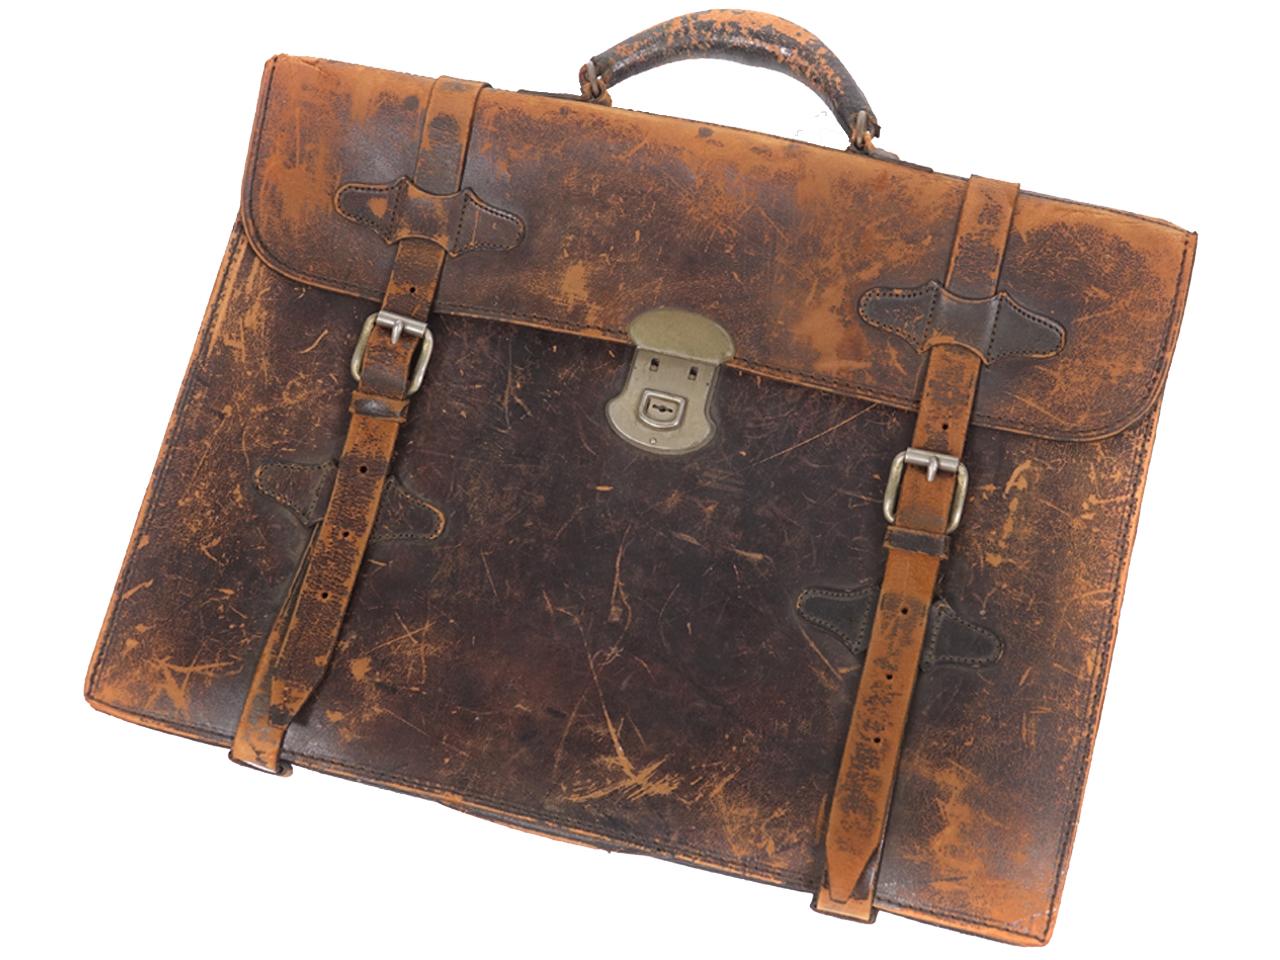 This is a delicate and early leather briefcase. The lock works and the leather straps are intact. There is no damage and it has just the right patina.